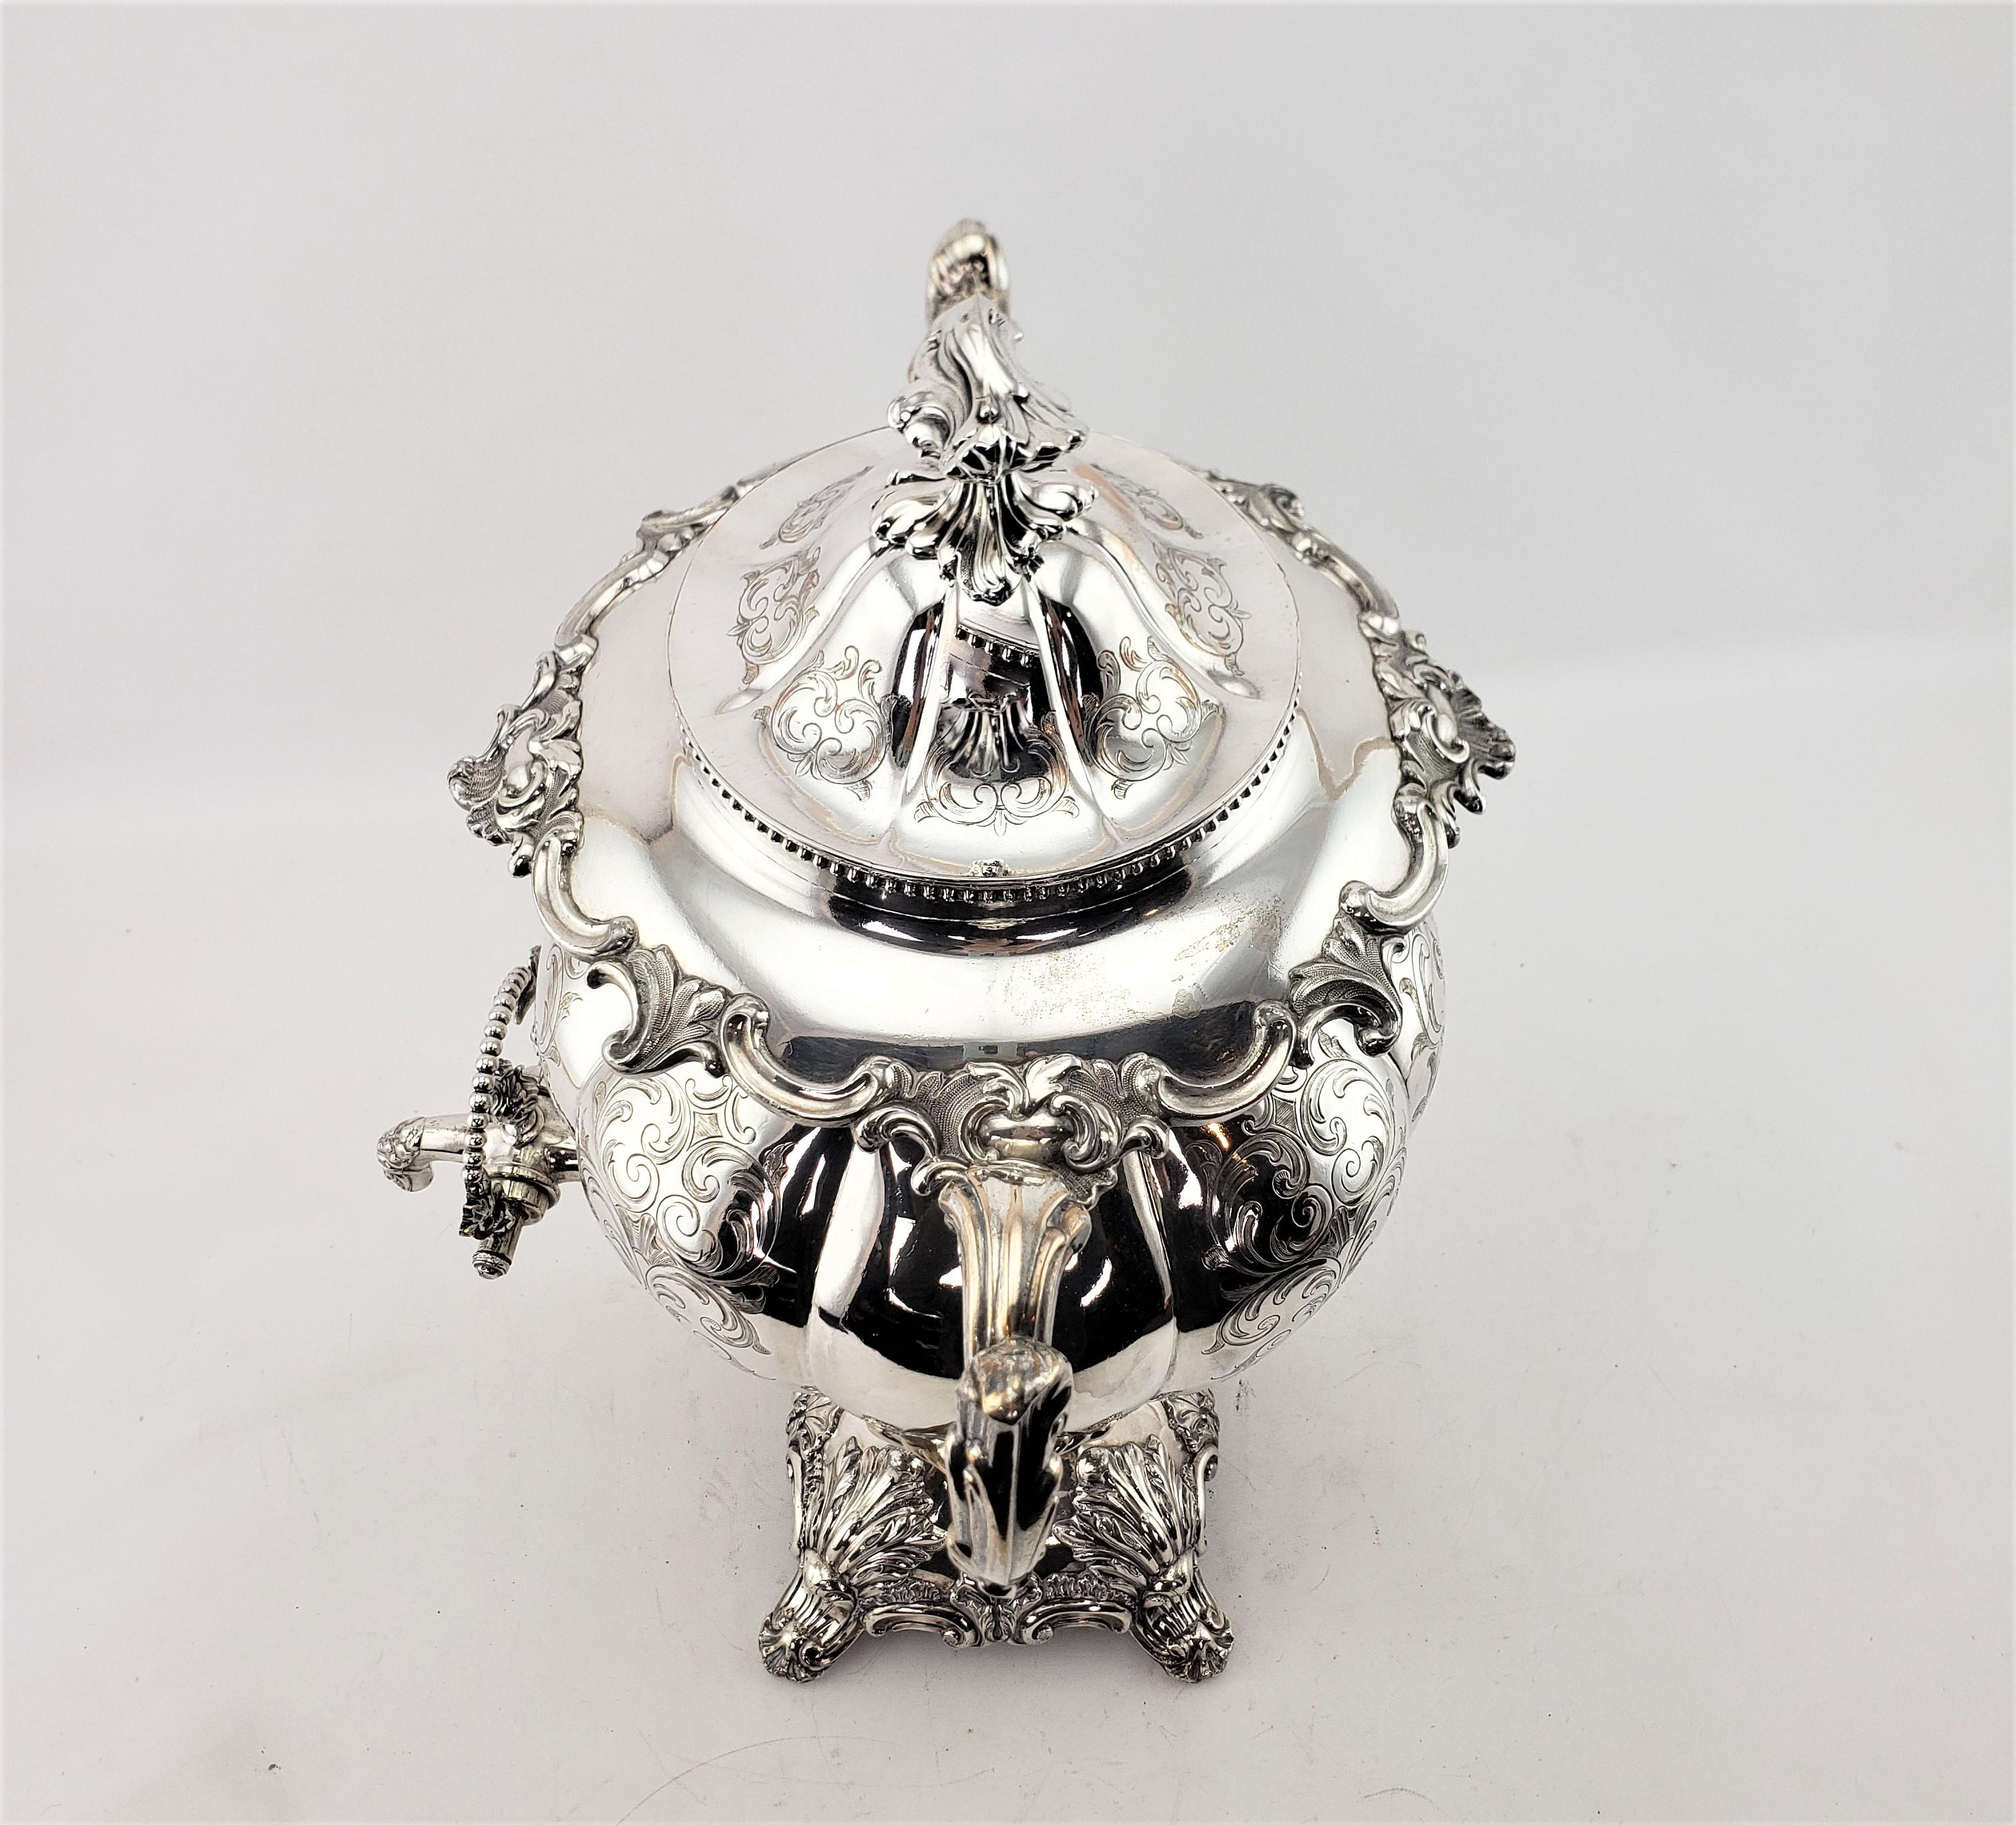 19th Century Antique Early Victorian Silver Plated Tea or Hot Water Urn with Floral Engraving For Sale